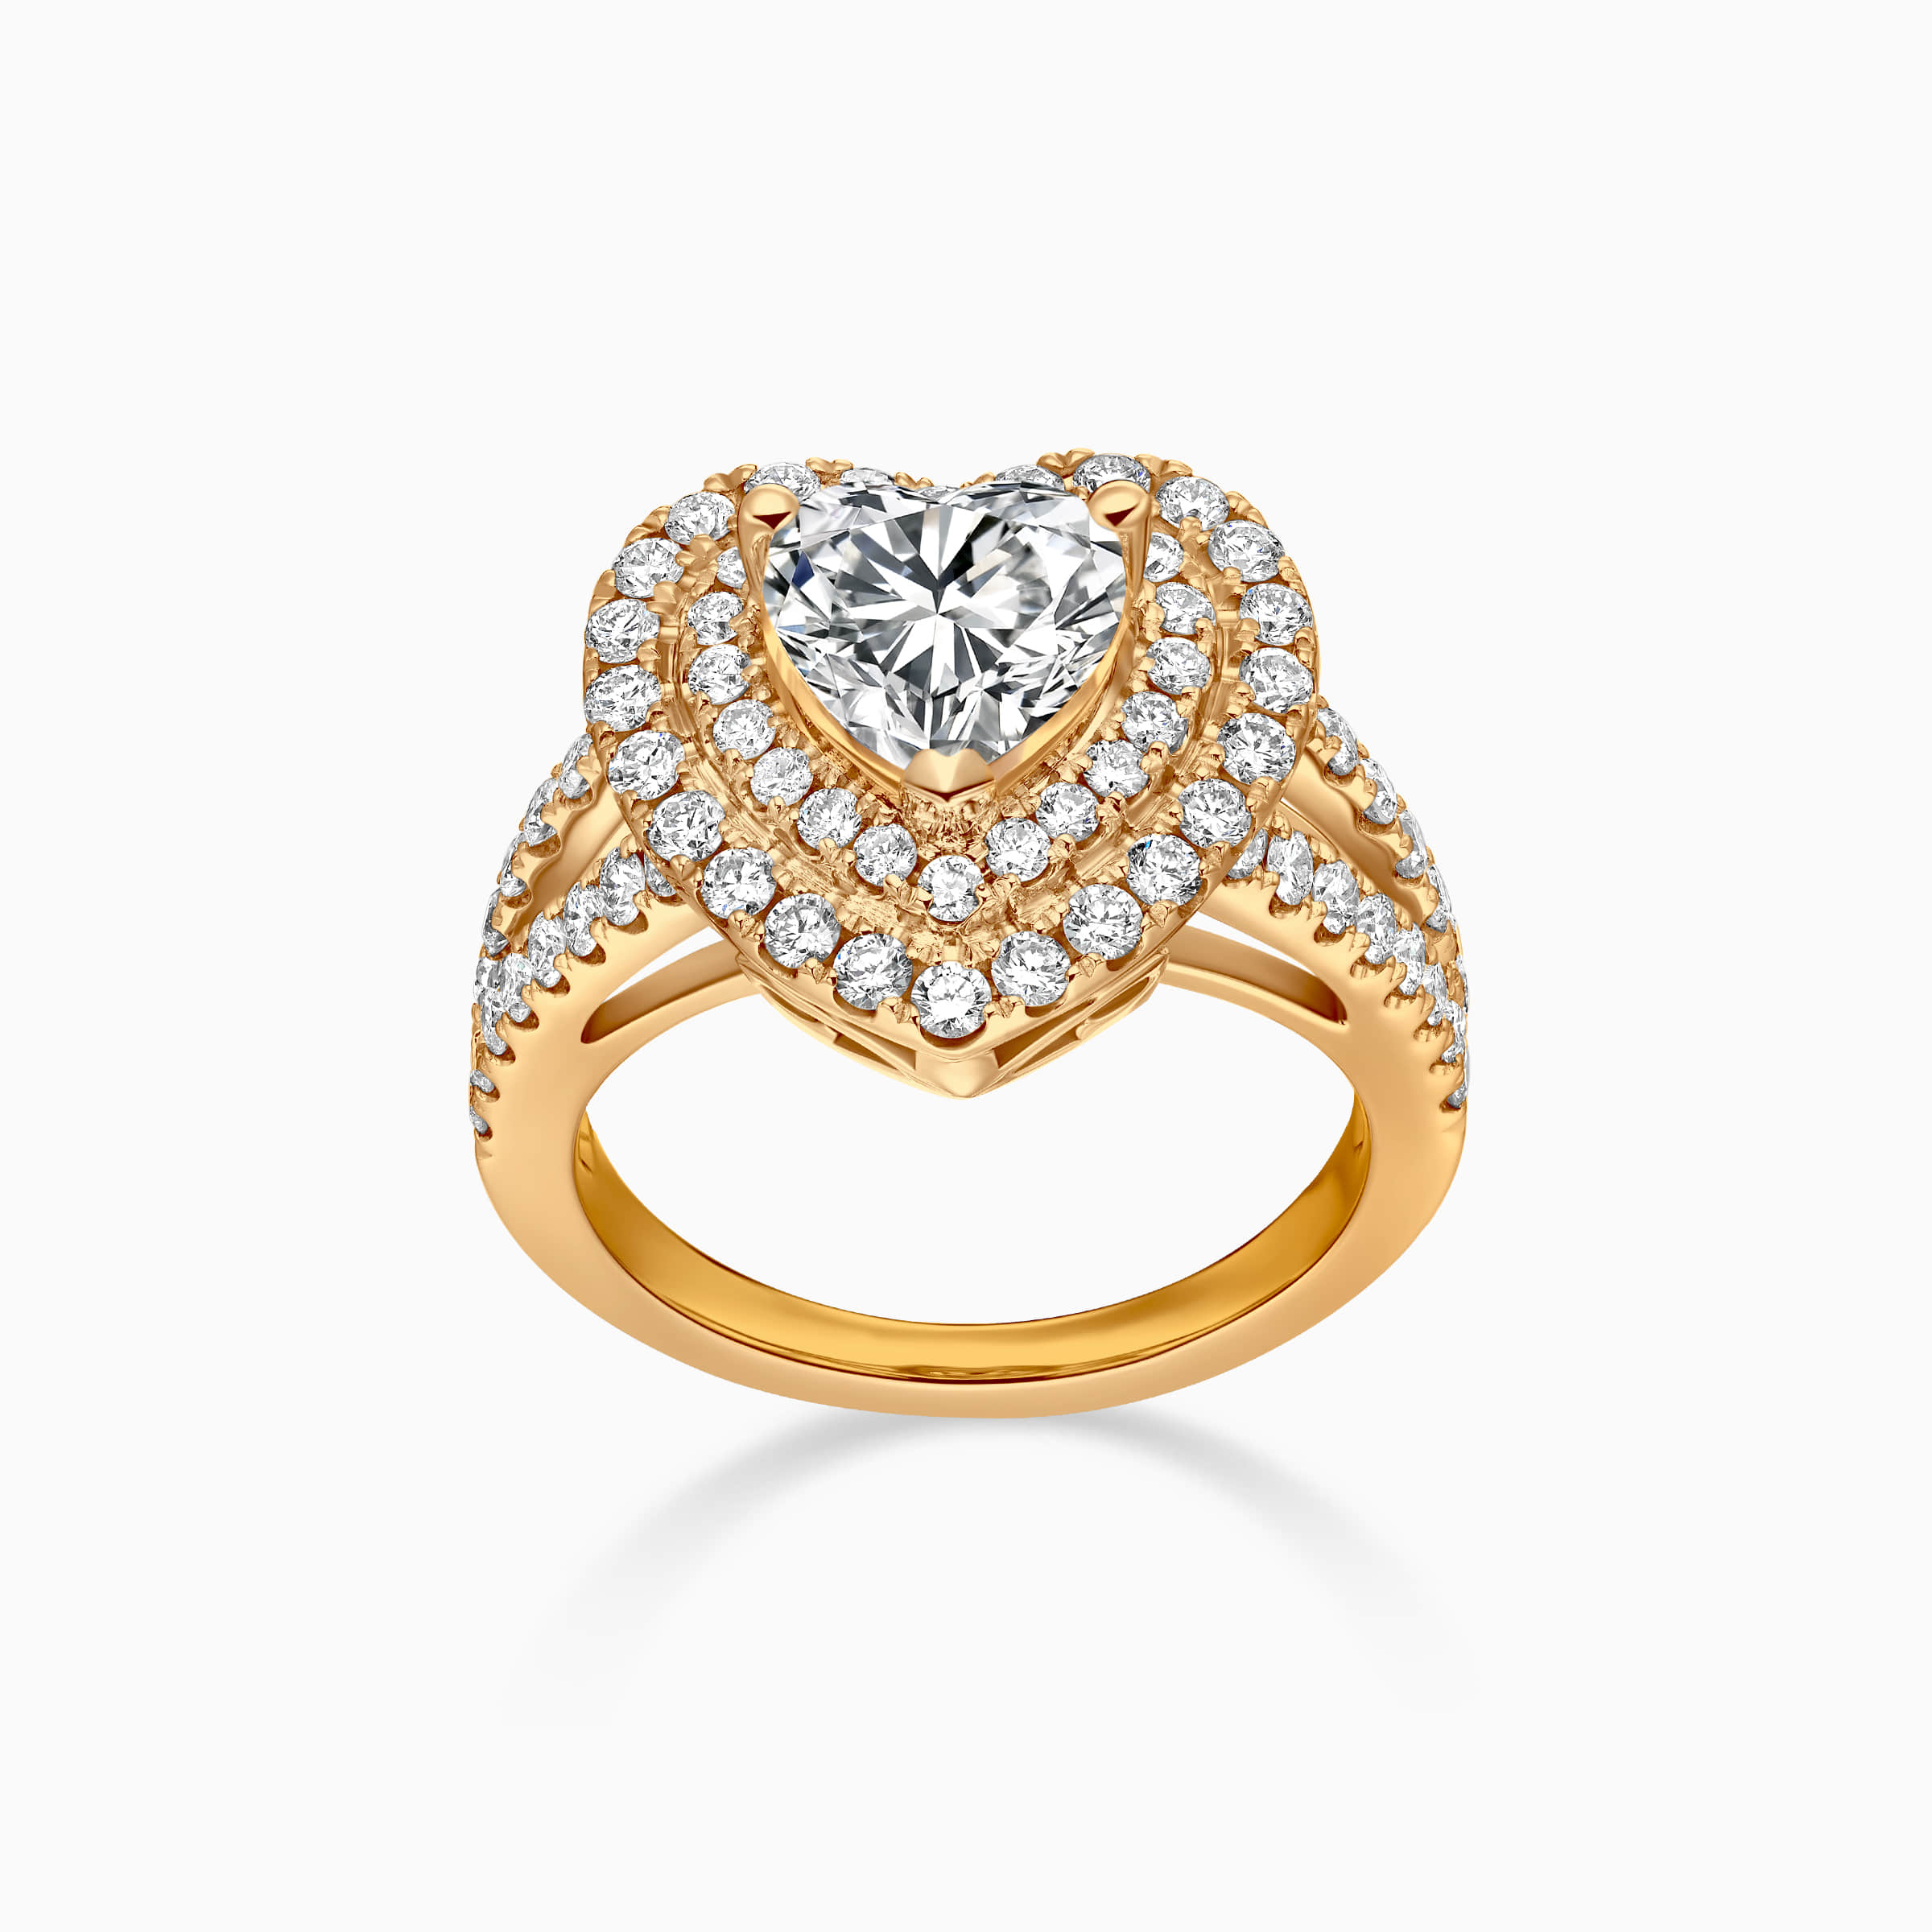 Darry Ring double halo heart engagement ring in yellow gold